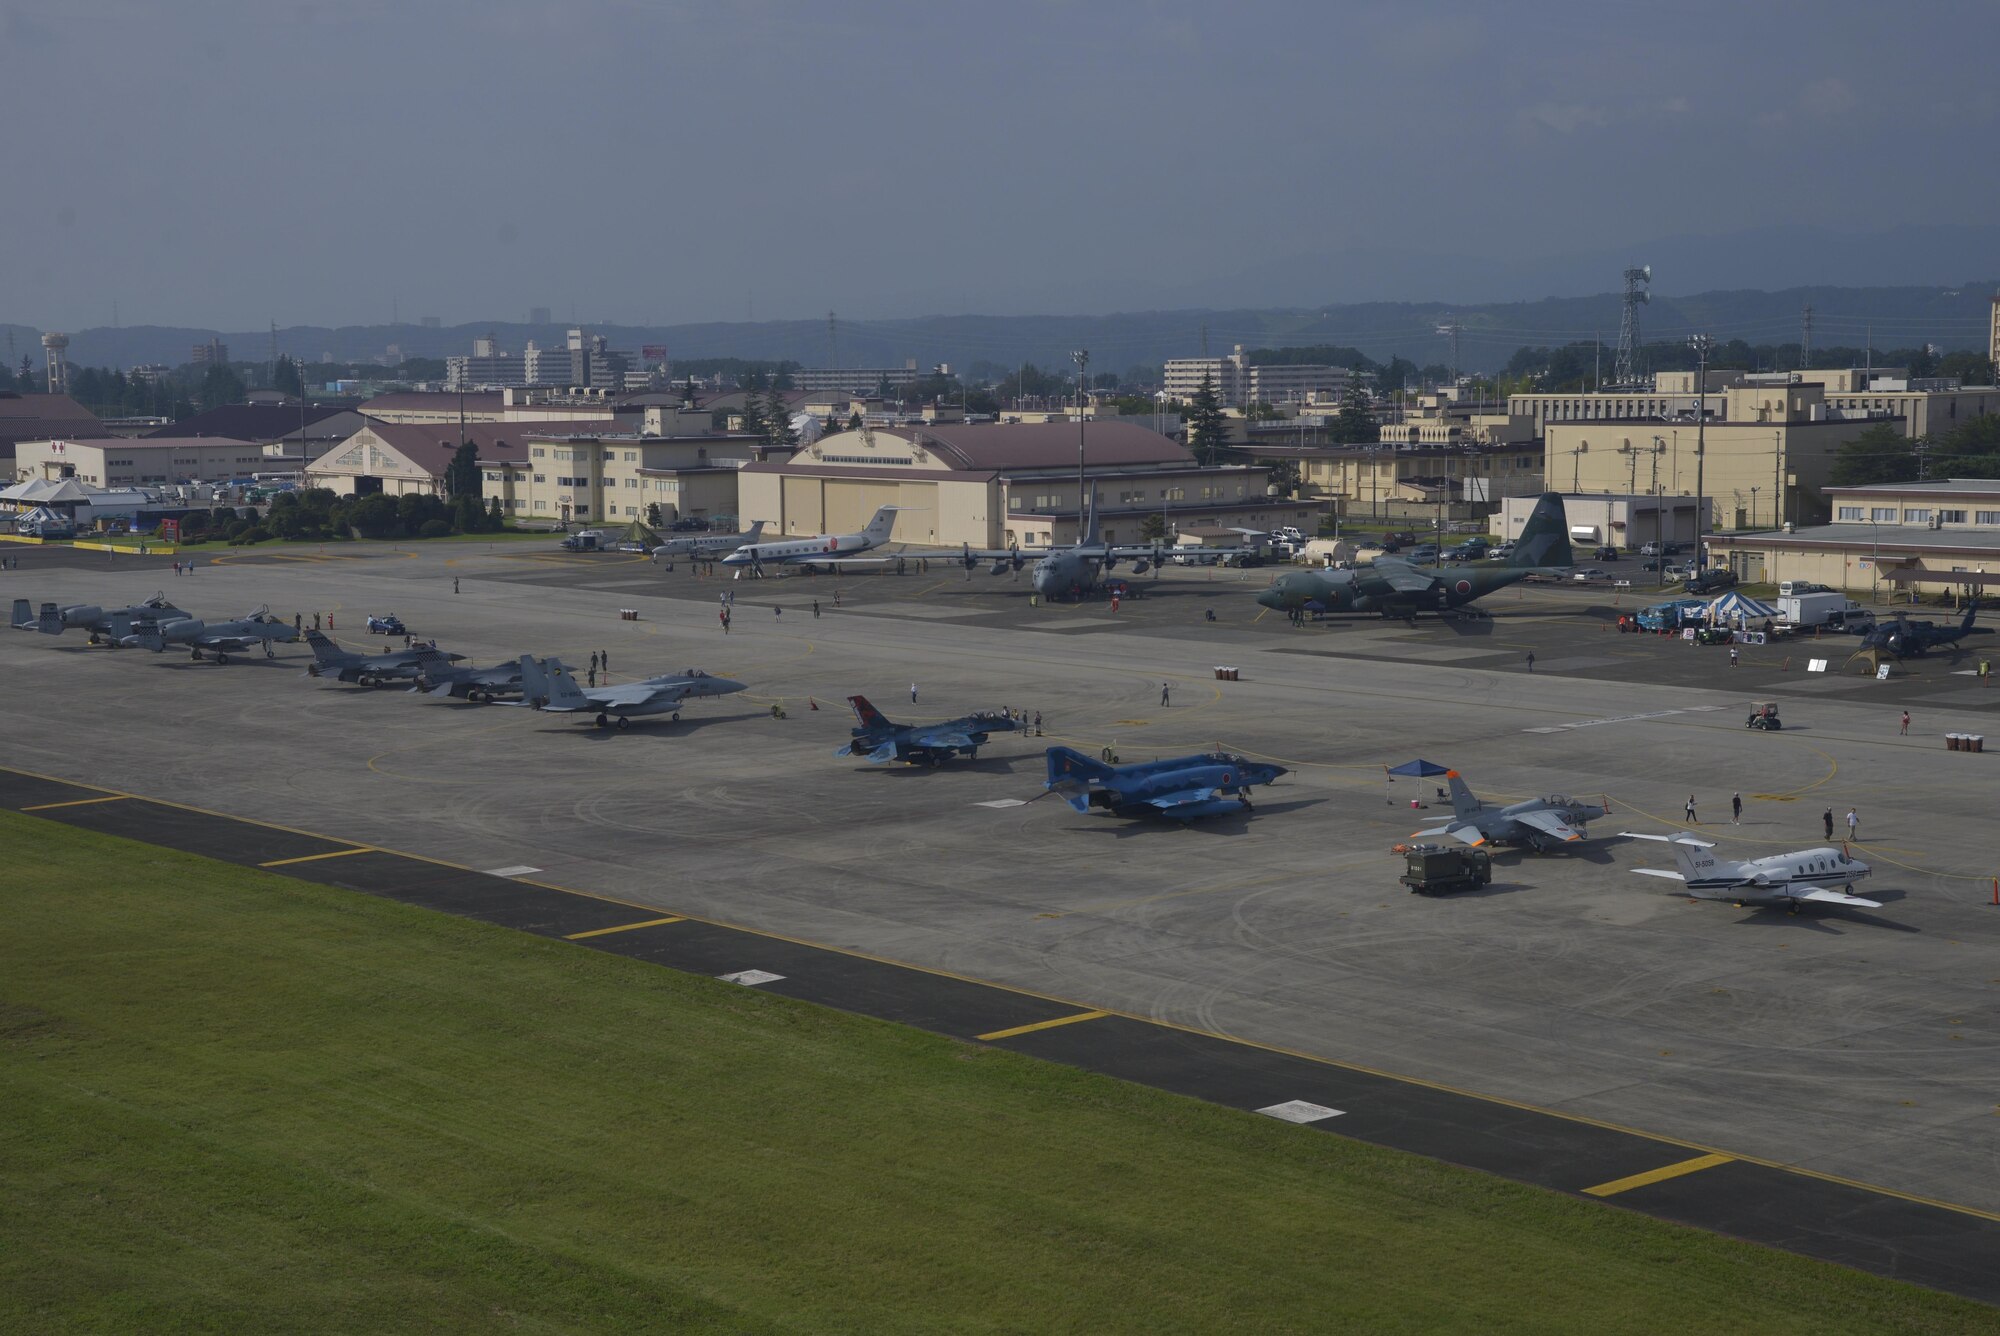 Aircraft from the United States and Japan military sit on the flightlight before the gates open for the Friendship Festival at Yokota Air Base, Japan, Sept. 17, 2016. Approximately 185,000 people visited the festival in 2015. (U.S. Air Force photo by Senior Airman David Owsianka/Released)